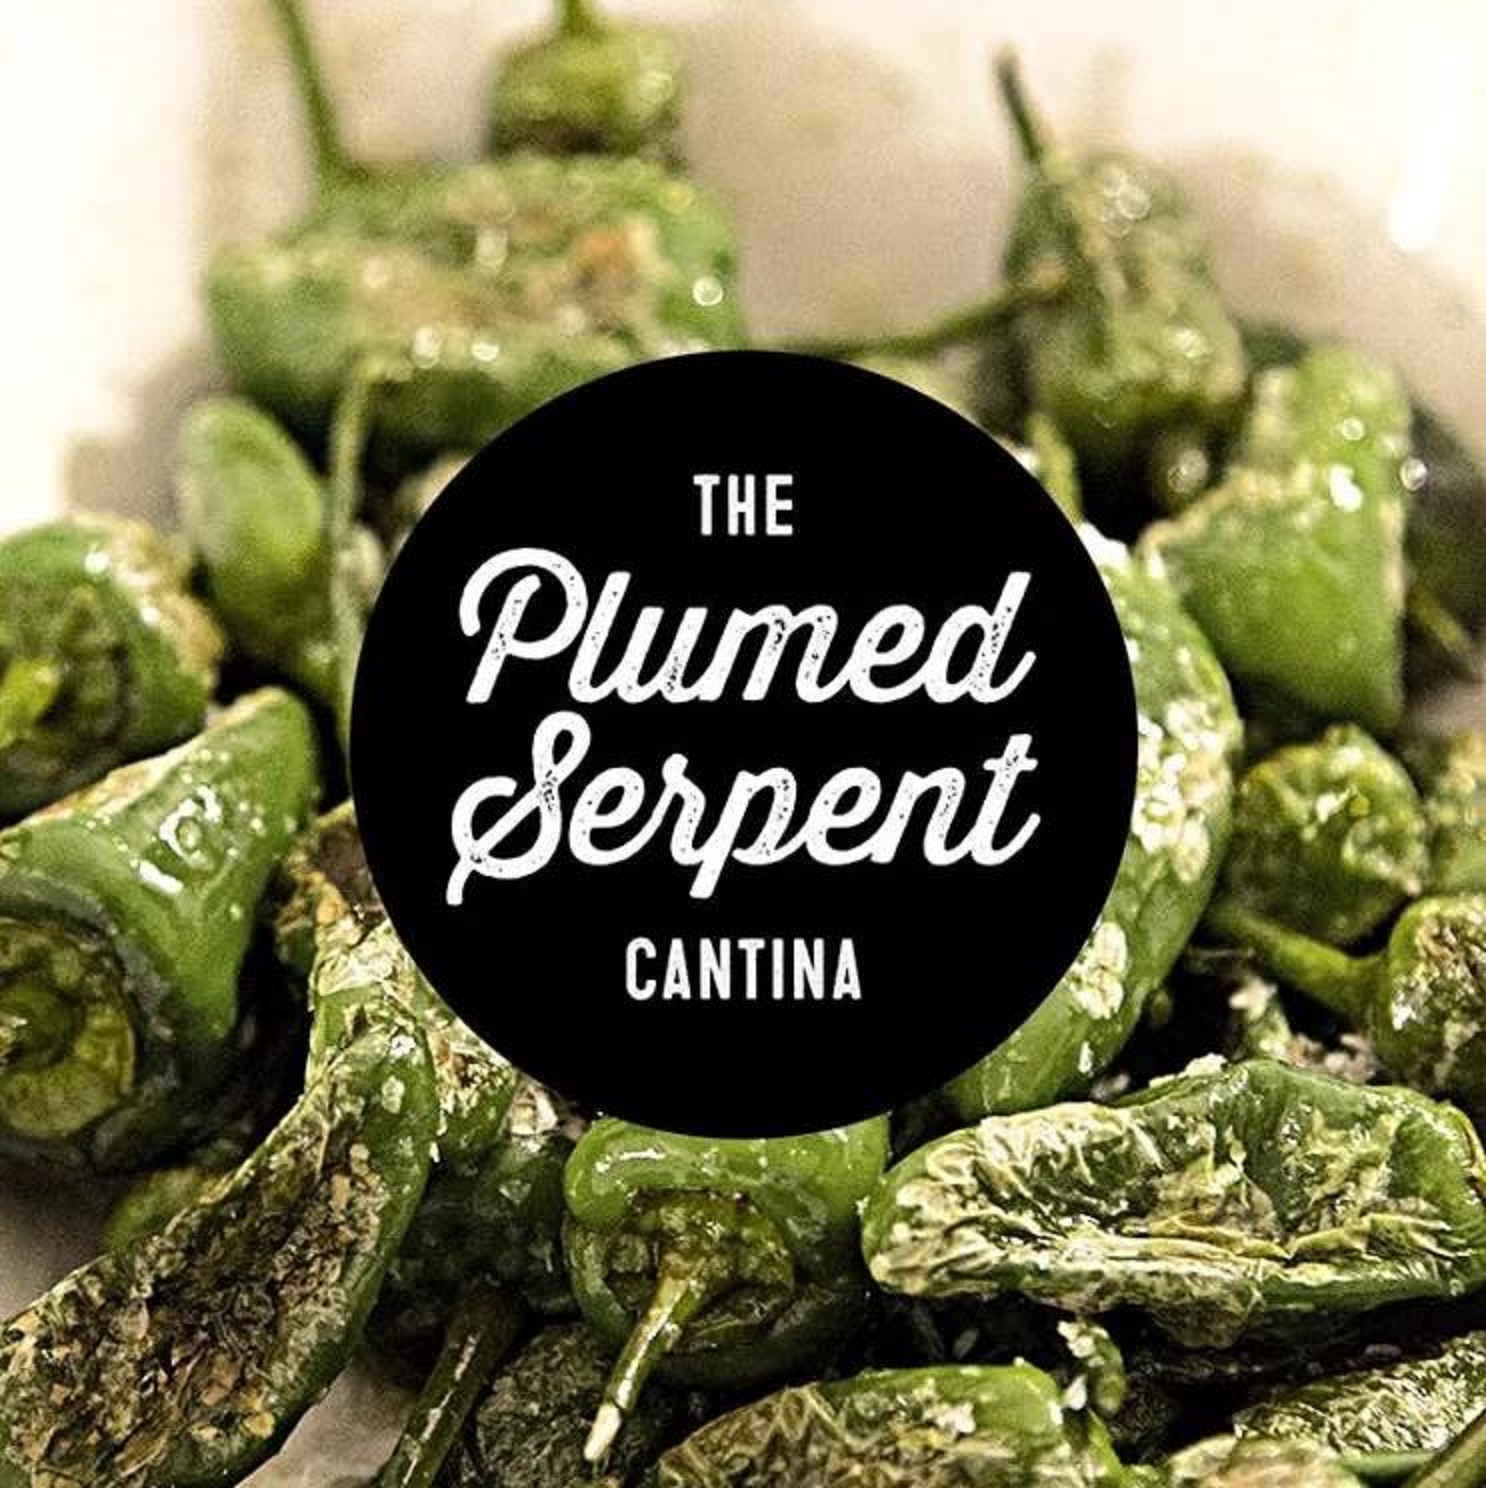 The Plumed Serpent Cantina